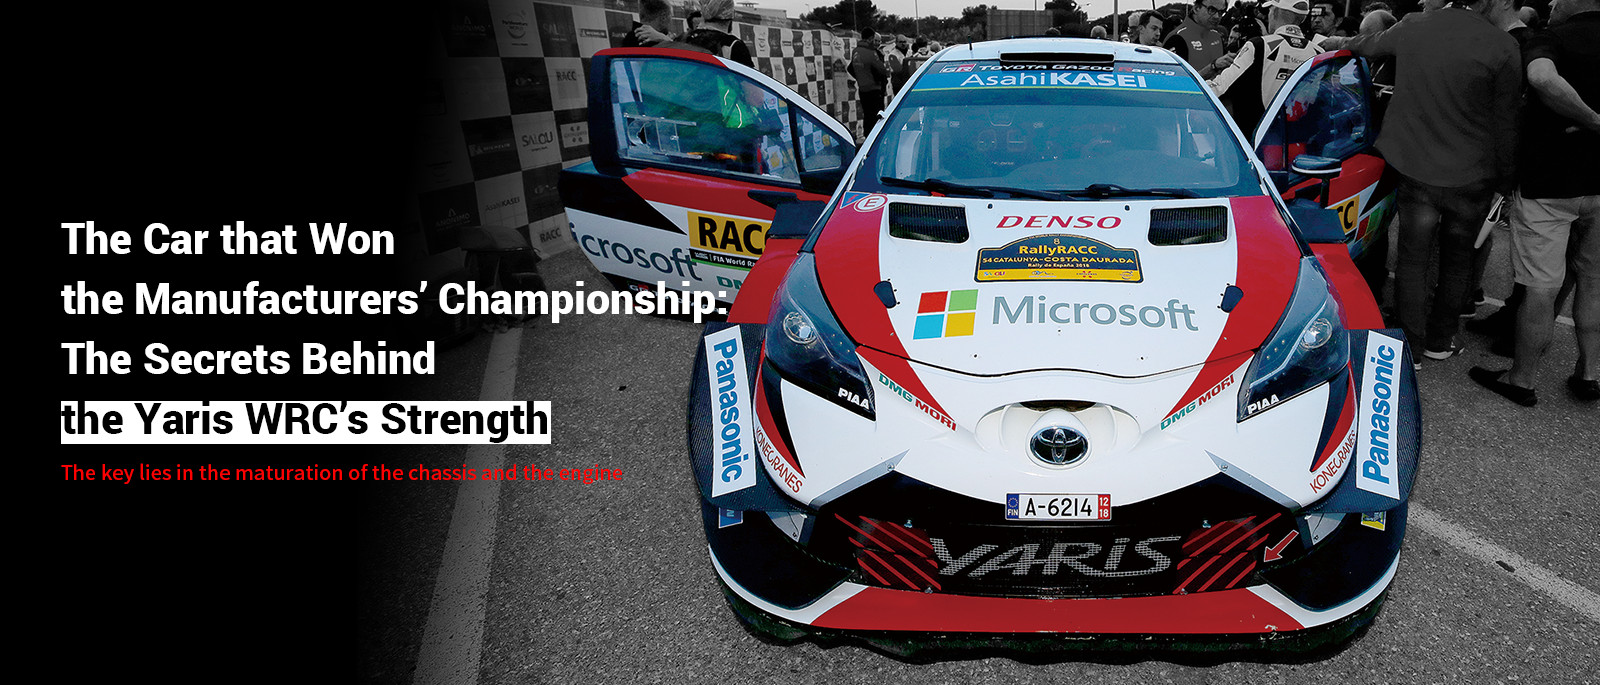 World Rally Championship 2018　TOYOTA GAZOO Racing, The Car that Won the Manufacturers’ Championship:The Secrets Behind the Yaris WRC’s Strength